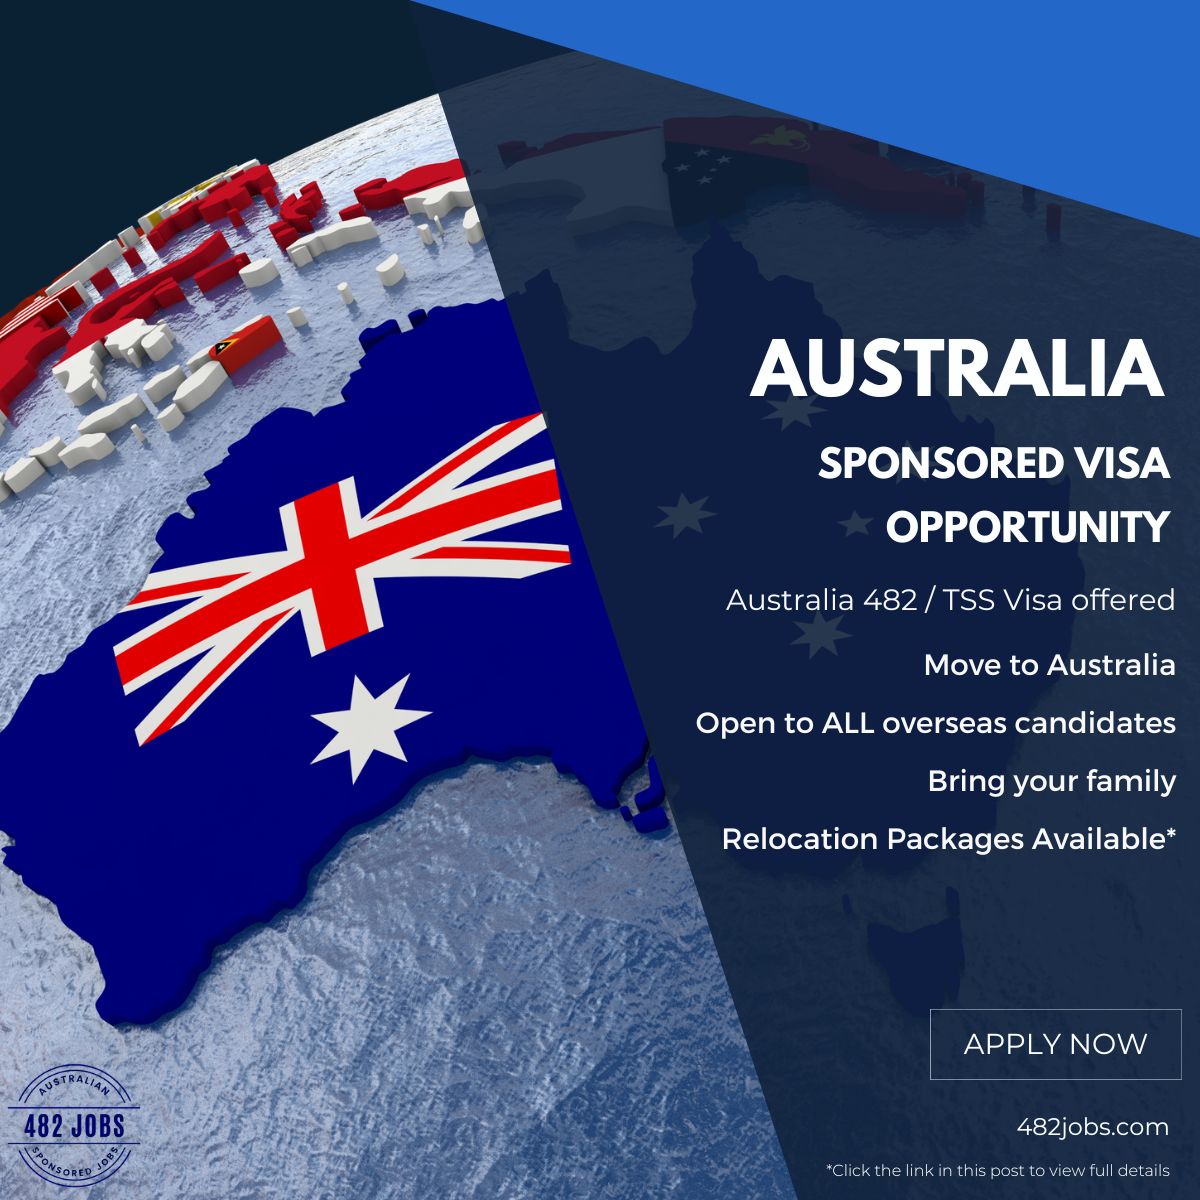 Chef/cook needed - Australia Sponsorship is available for successful candidates

#australiajobs #workinaustralia #workinbrisbane #workinsydney #australiavisa #jobinaustralia

482jobs.com/job/chef-cook-…